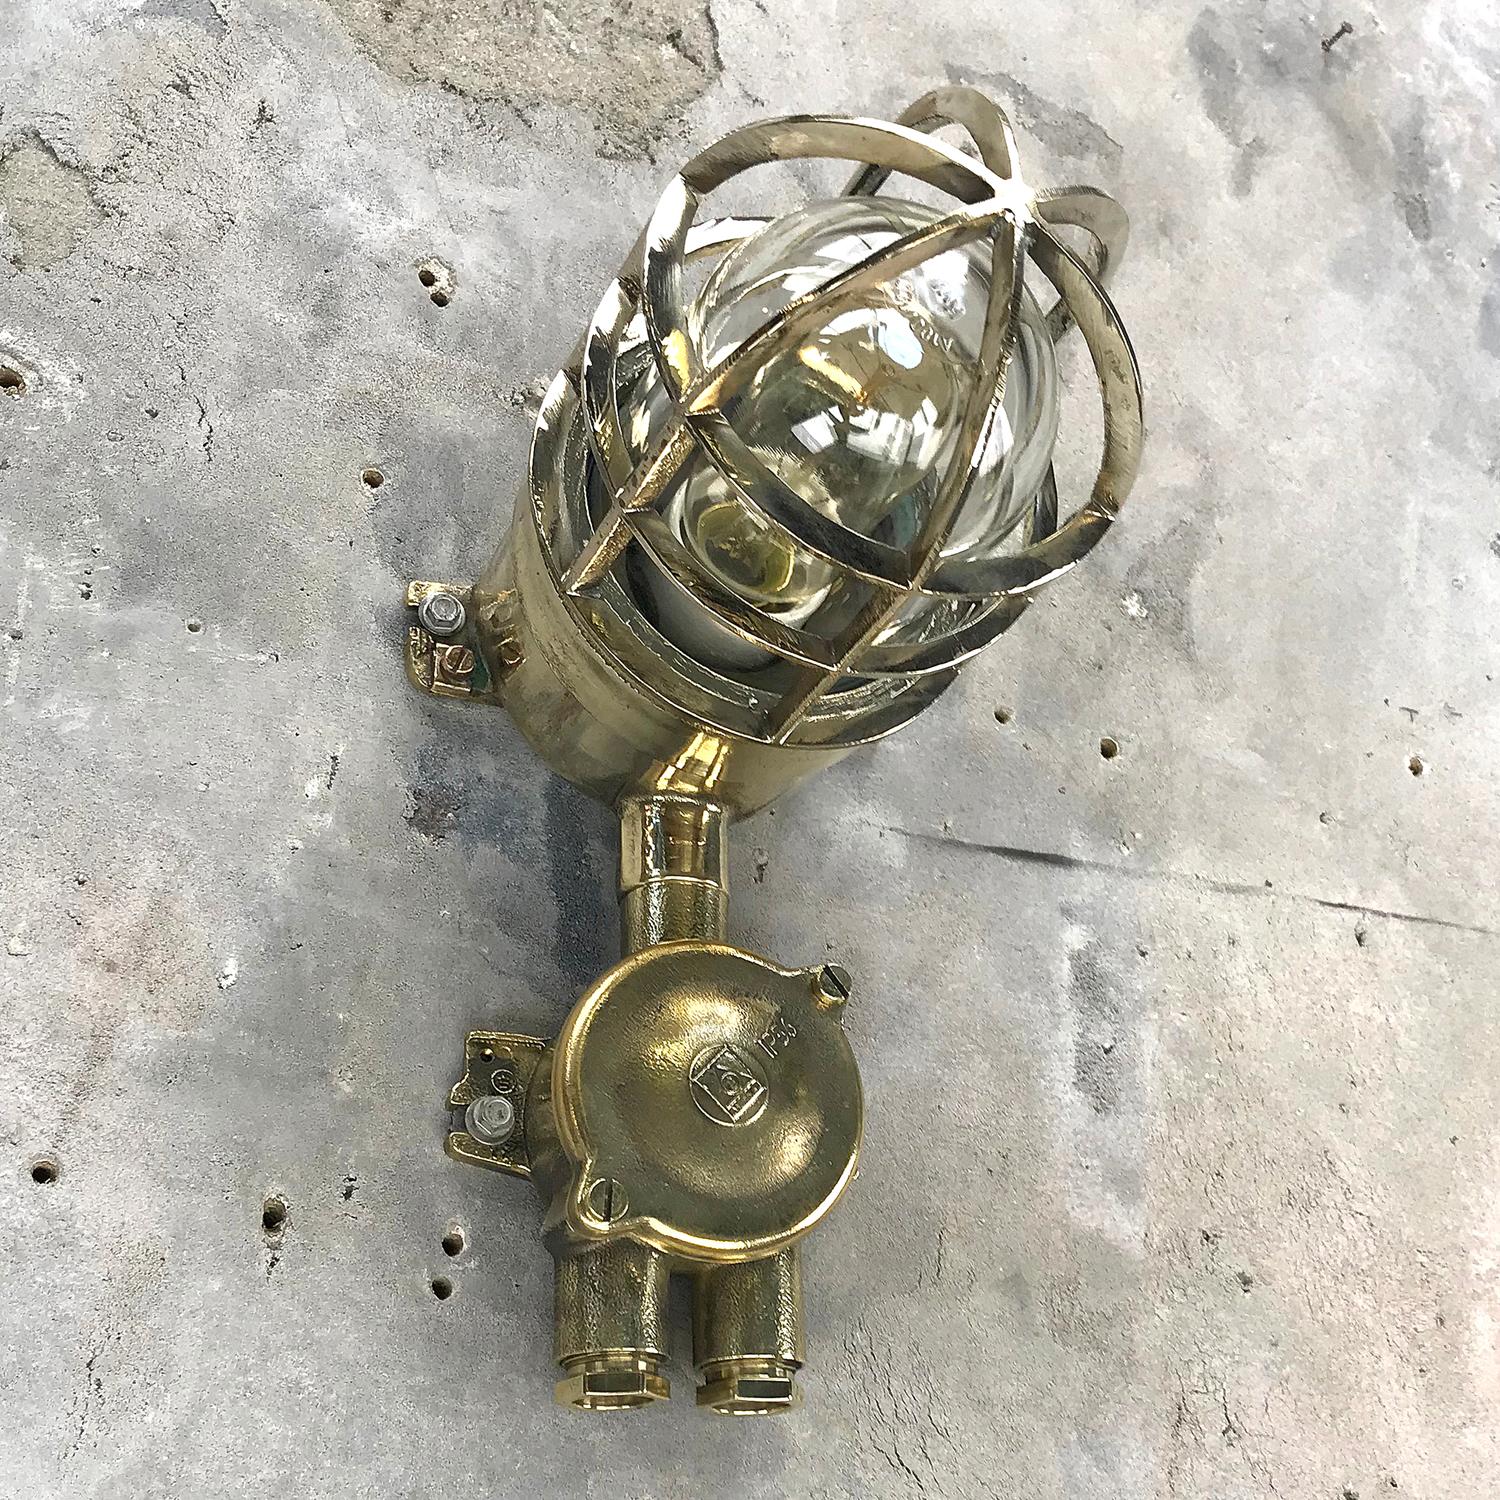 1970s German Explosion Proof Wall Light Cast Brass, Glass Shade and Junction Box 1